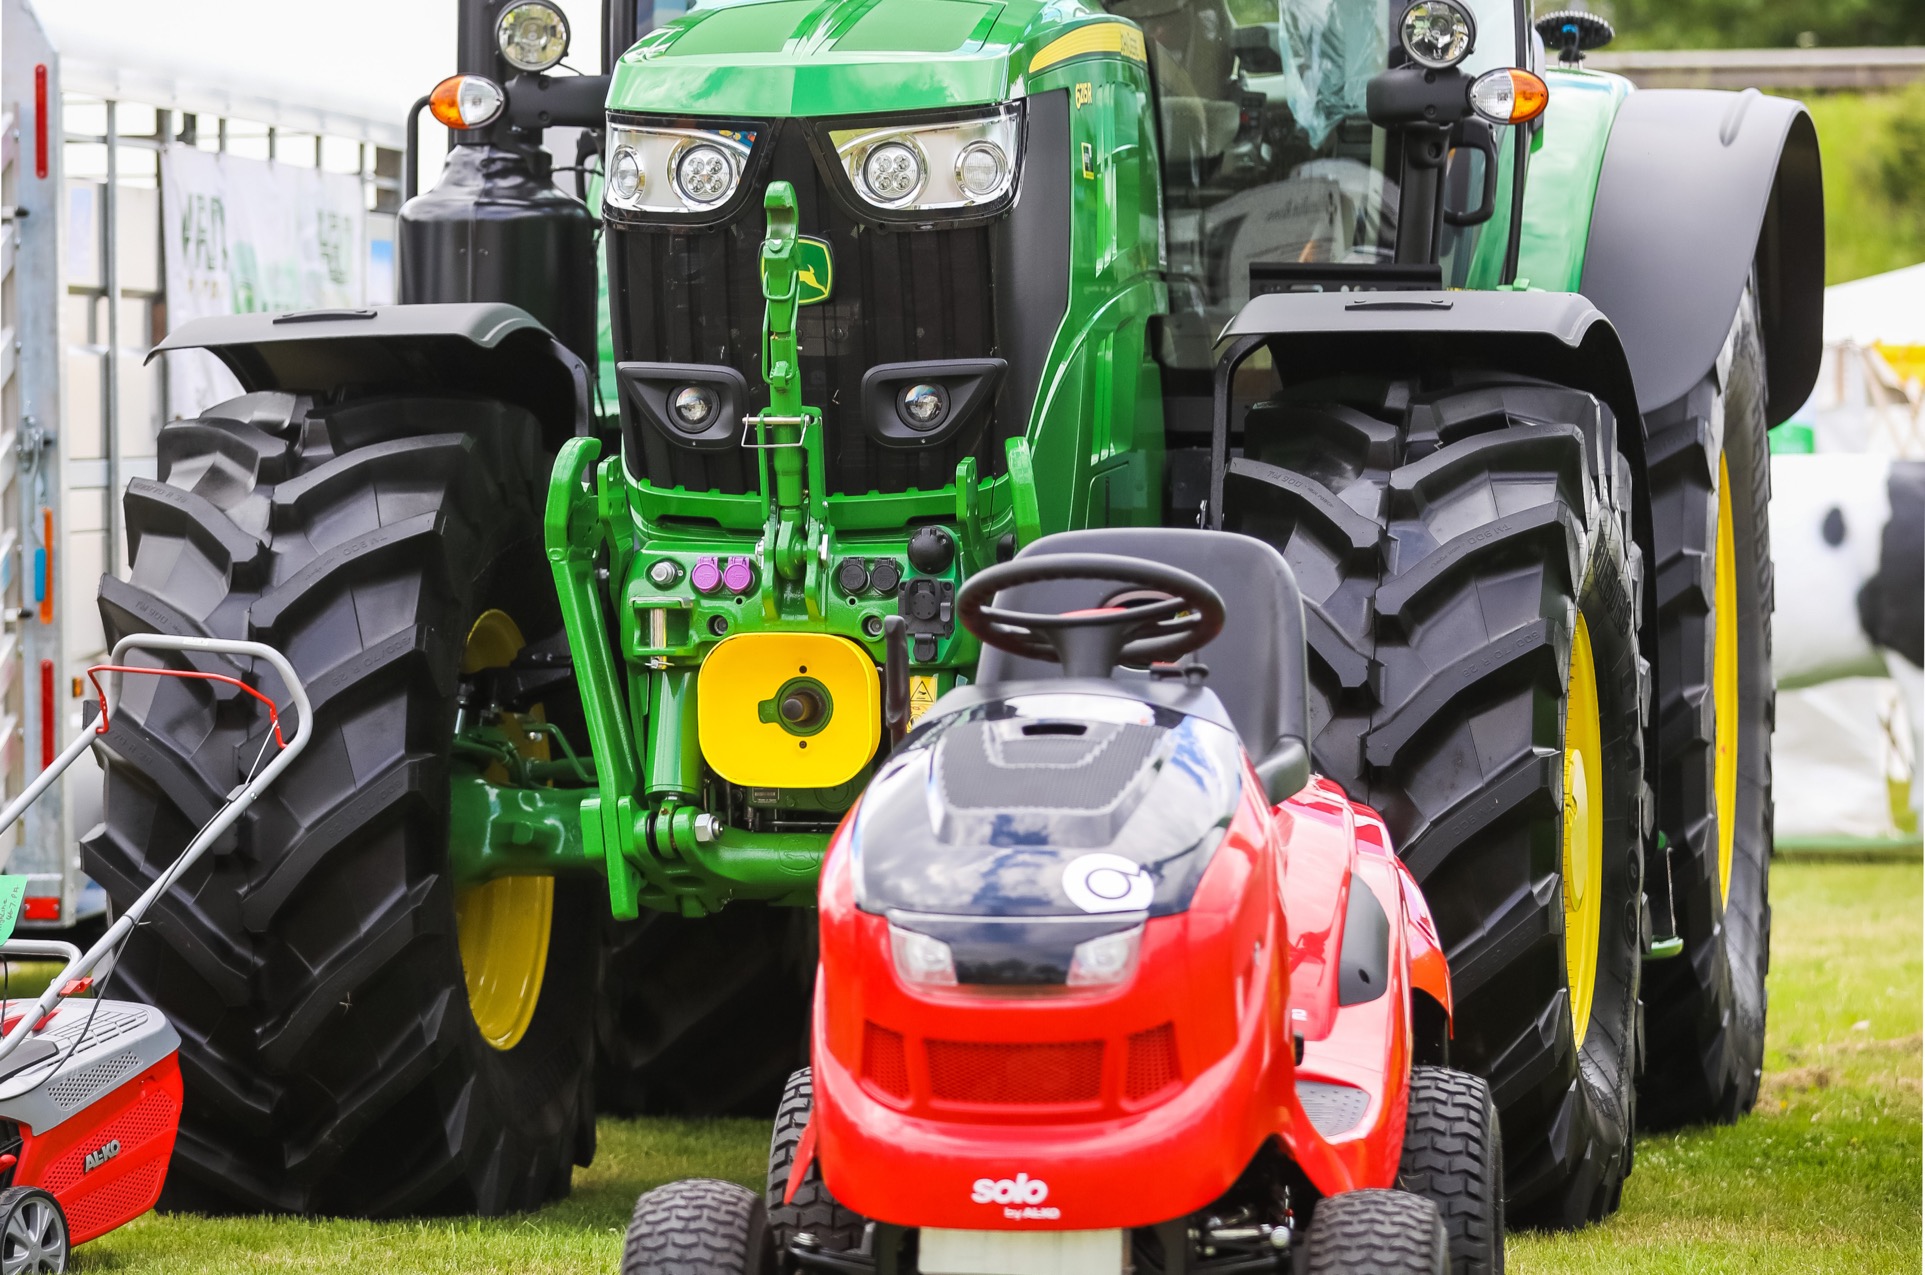 Inspect new tractors and machinery - large and small...